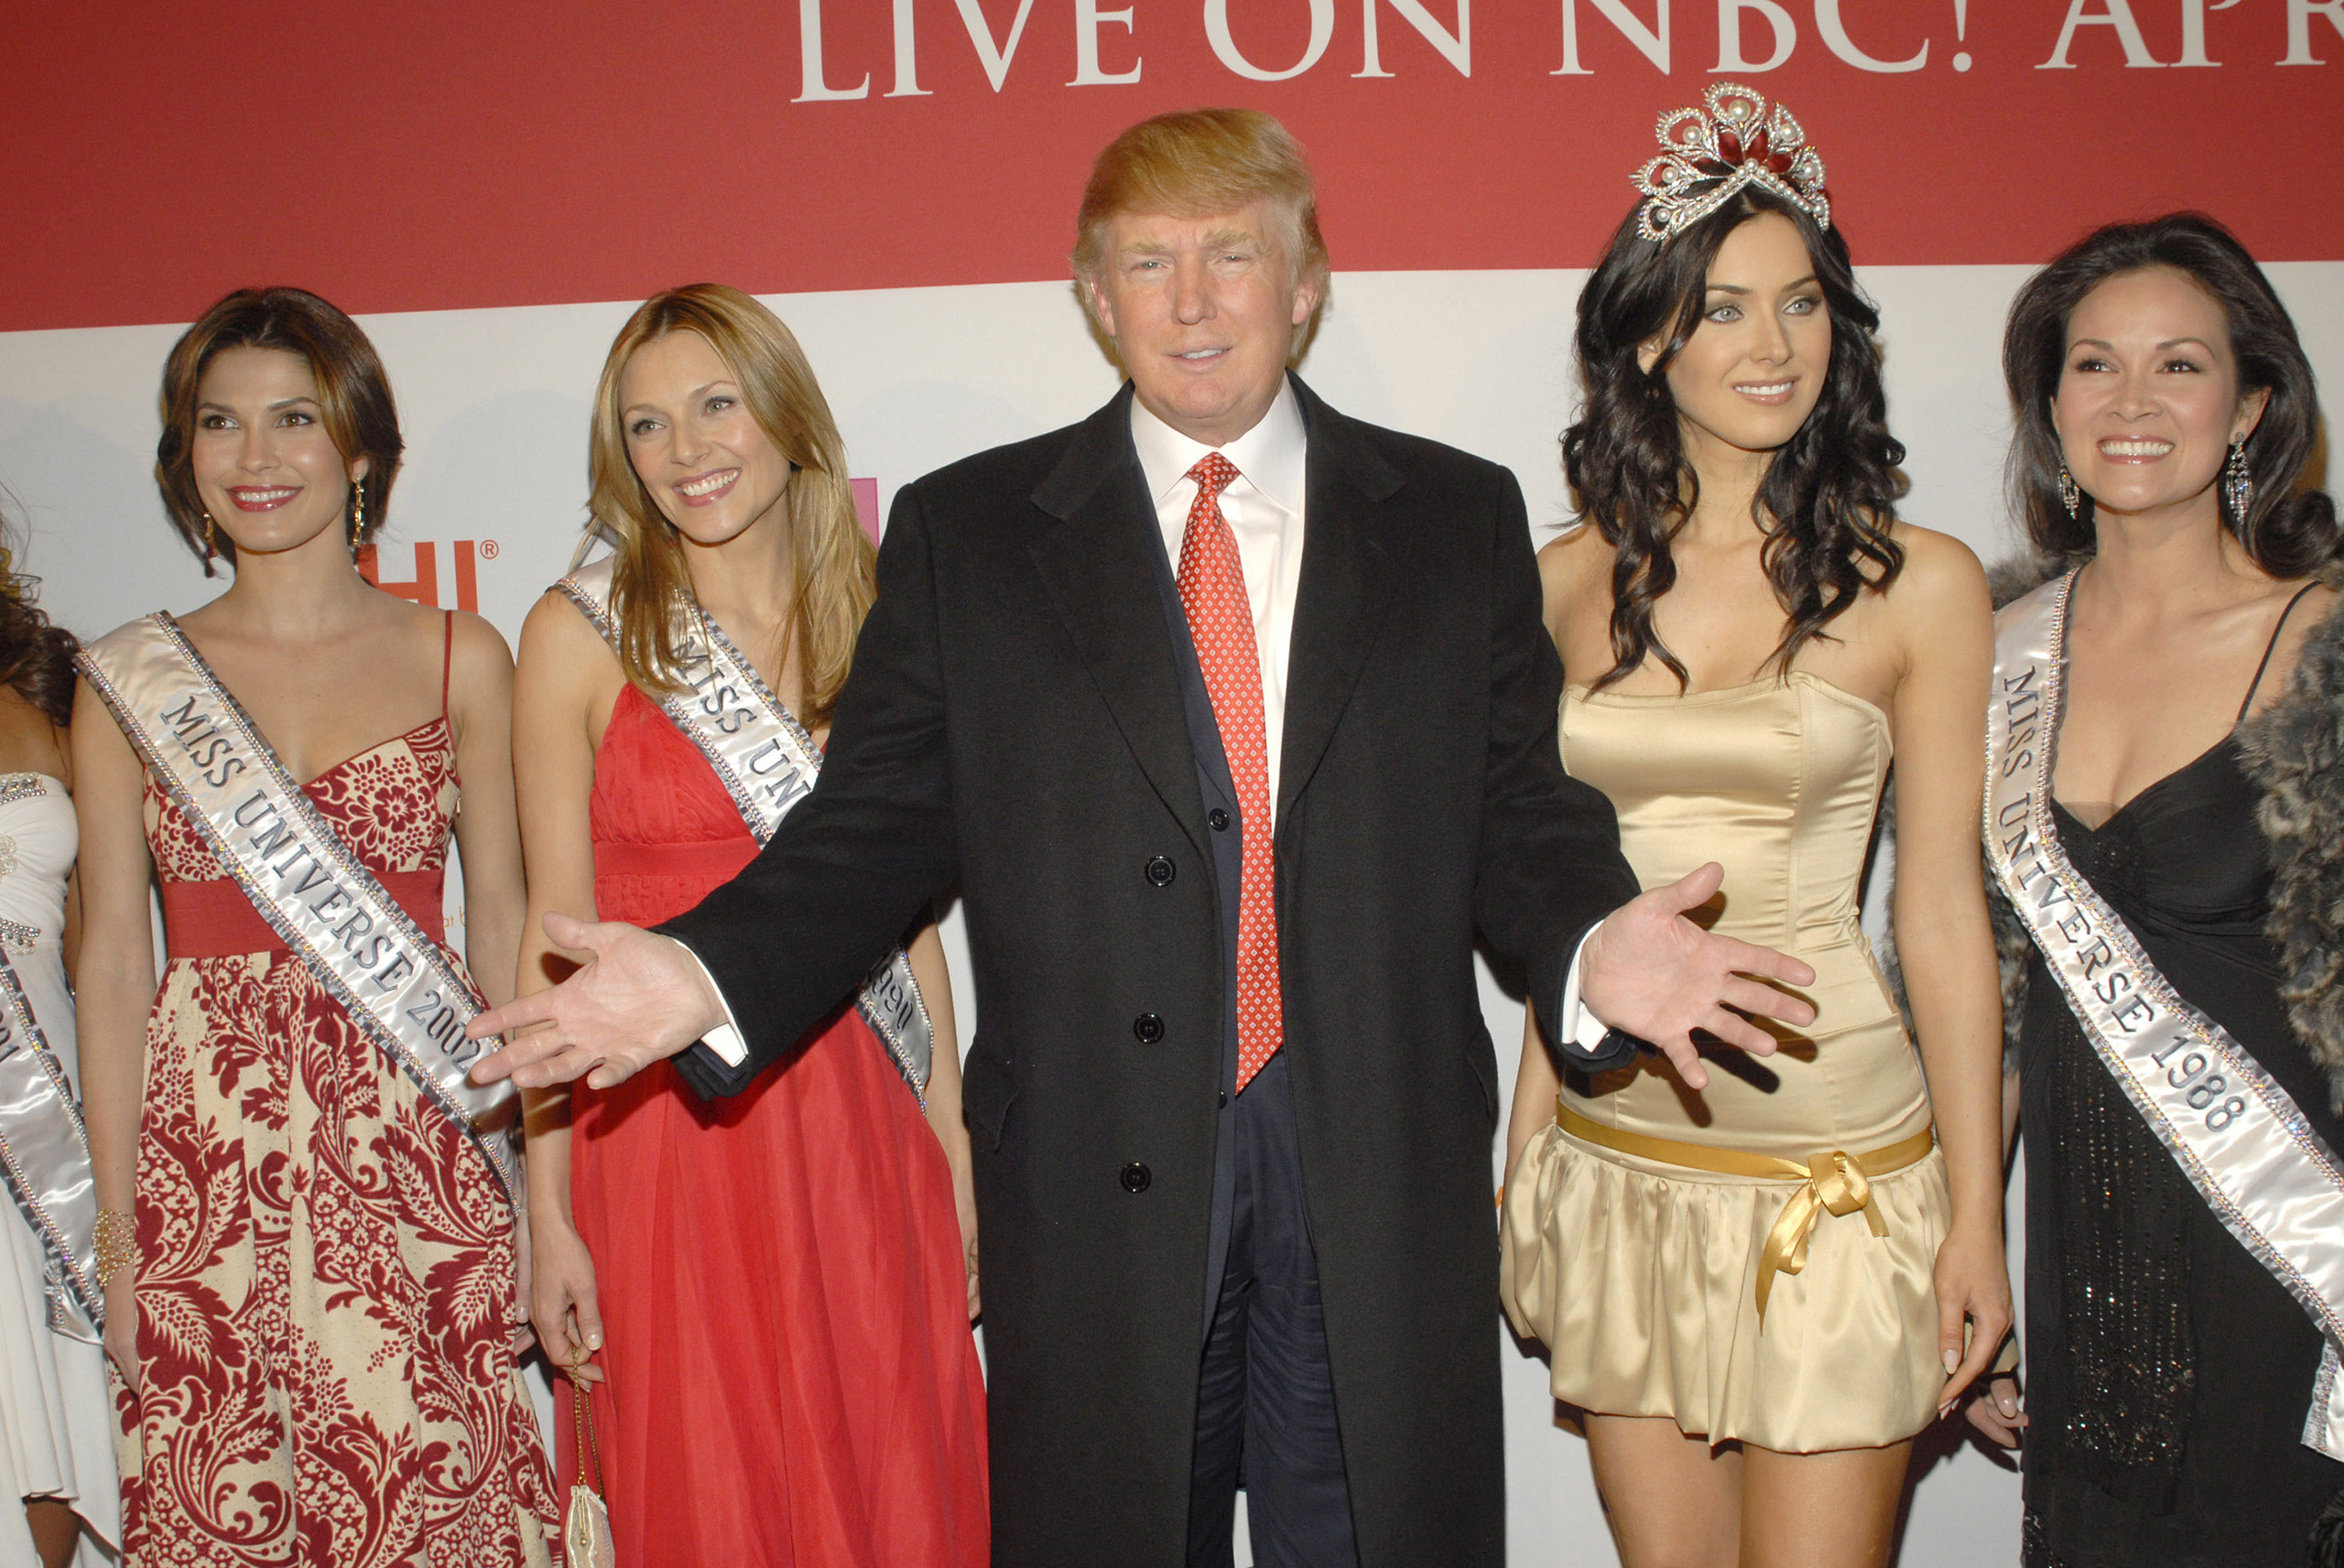 Donald Trump with former Miss Universes and the 2006 current Miss Universe, Natalie Glebova, April 18, 2006. (G. Gershoff—WireImage/Getty Images)